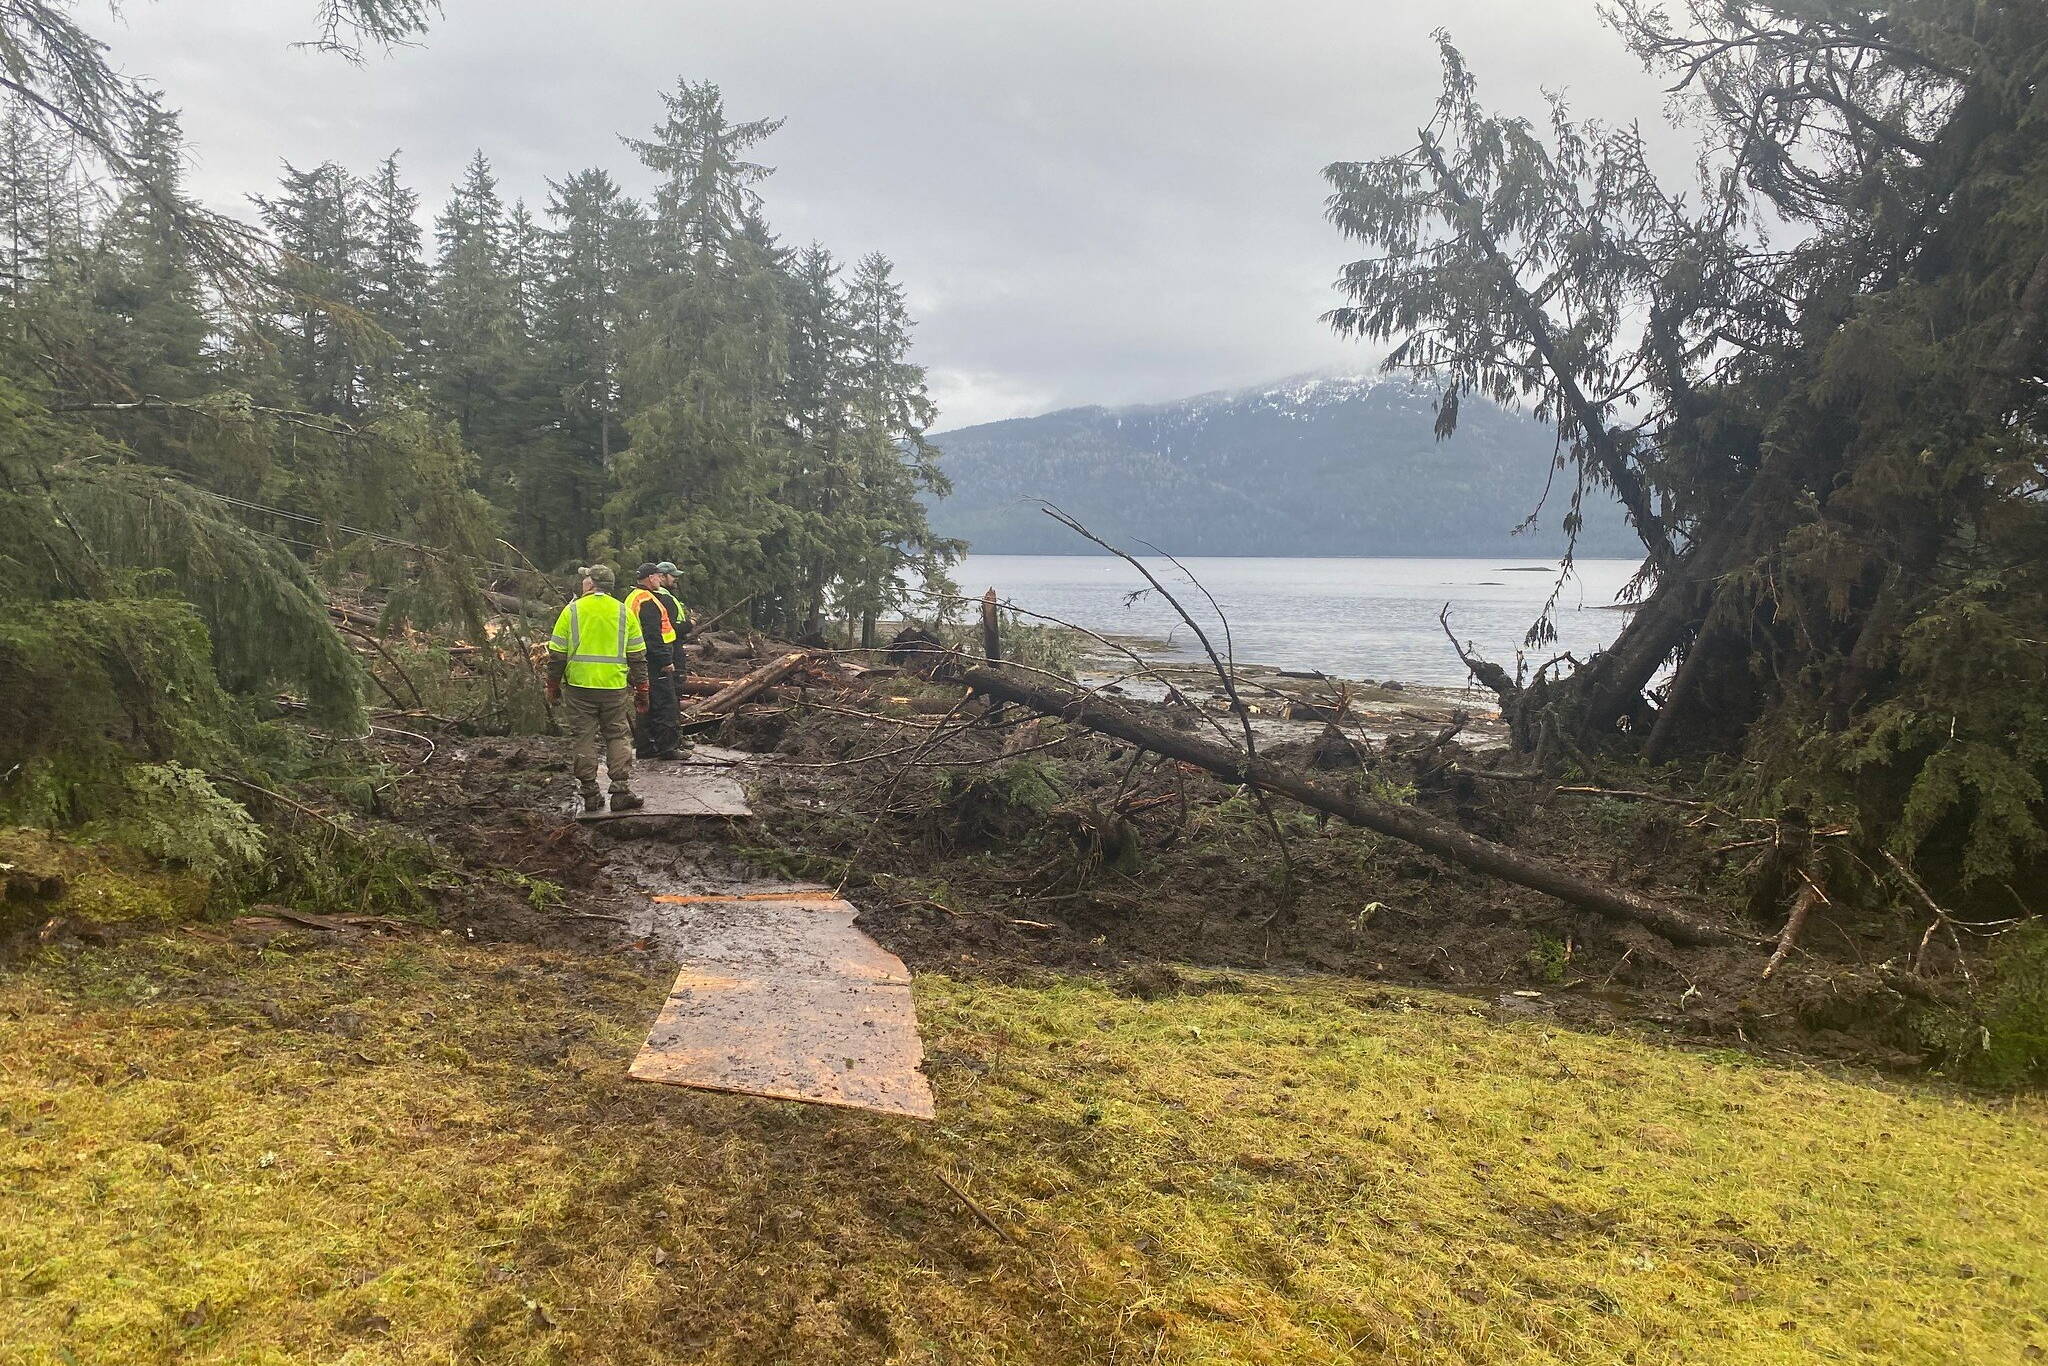 Search and rescue officials examine the area about 11 miles south of the center of Wrangell where a landslide occurred on Nov. 20. Five people are confirmed dead from the landslide and one still missing. (Photo courtesy of Alaska Department of Public Safety)